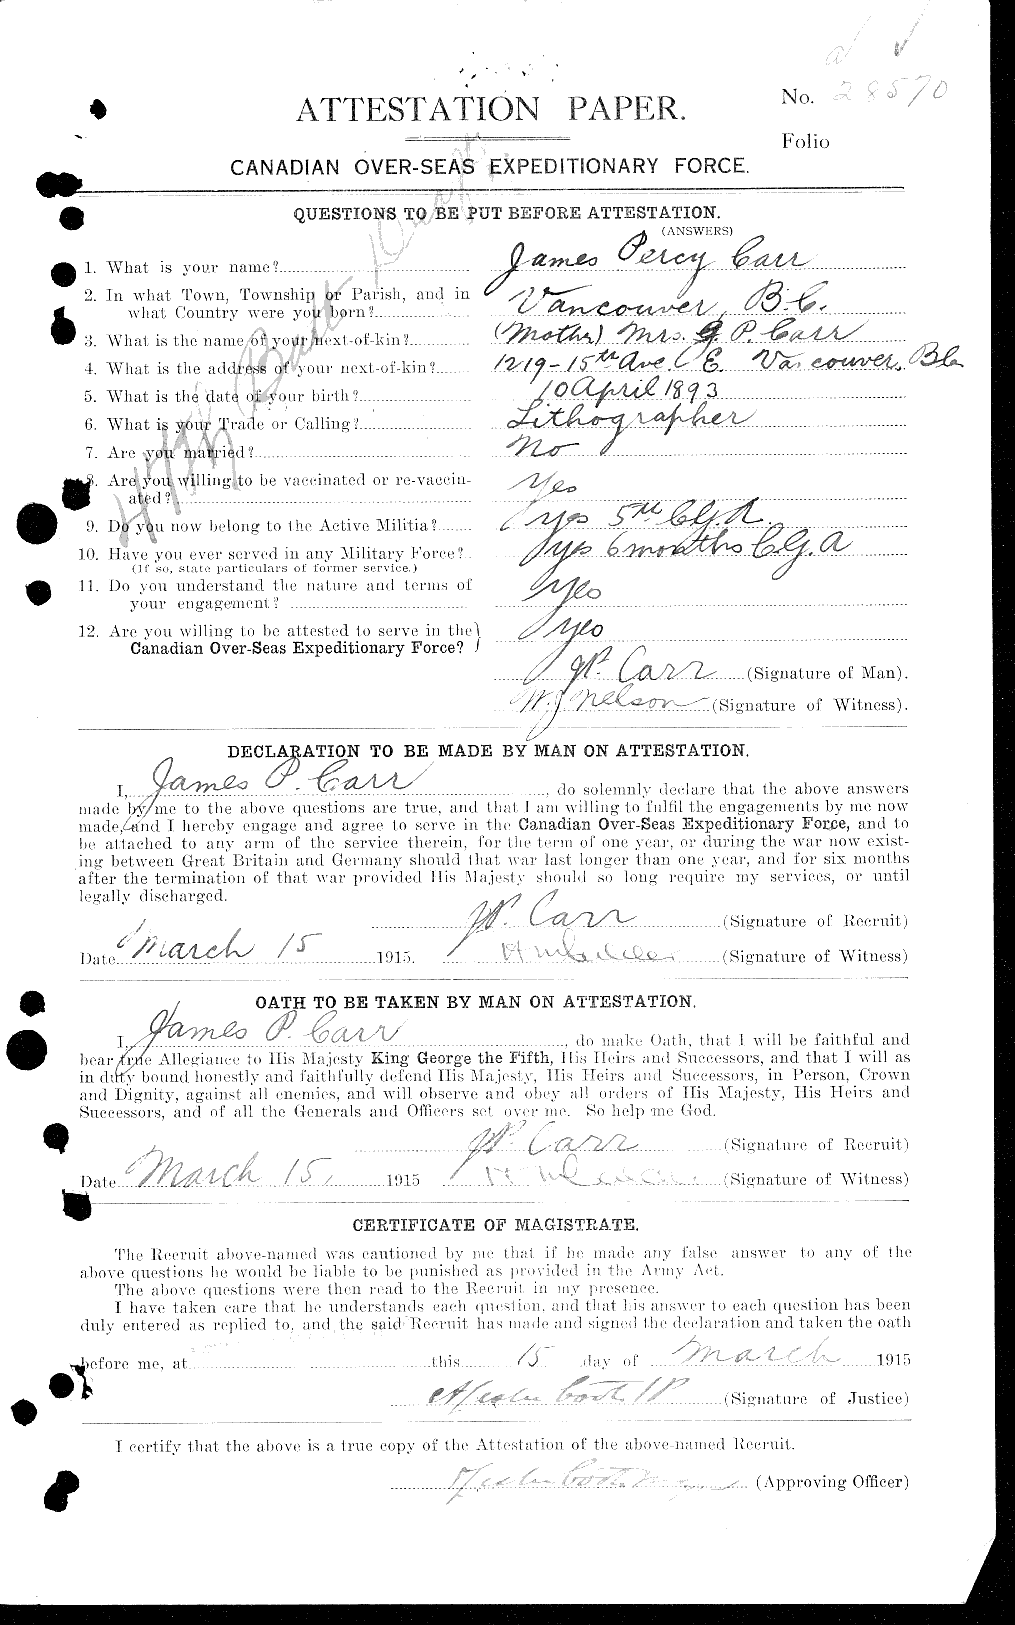 Personnel Records of the First World War - CEF 010358a